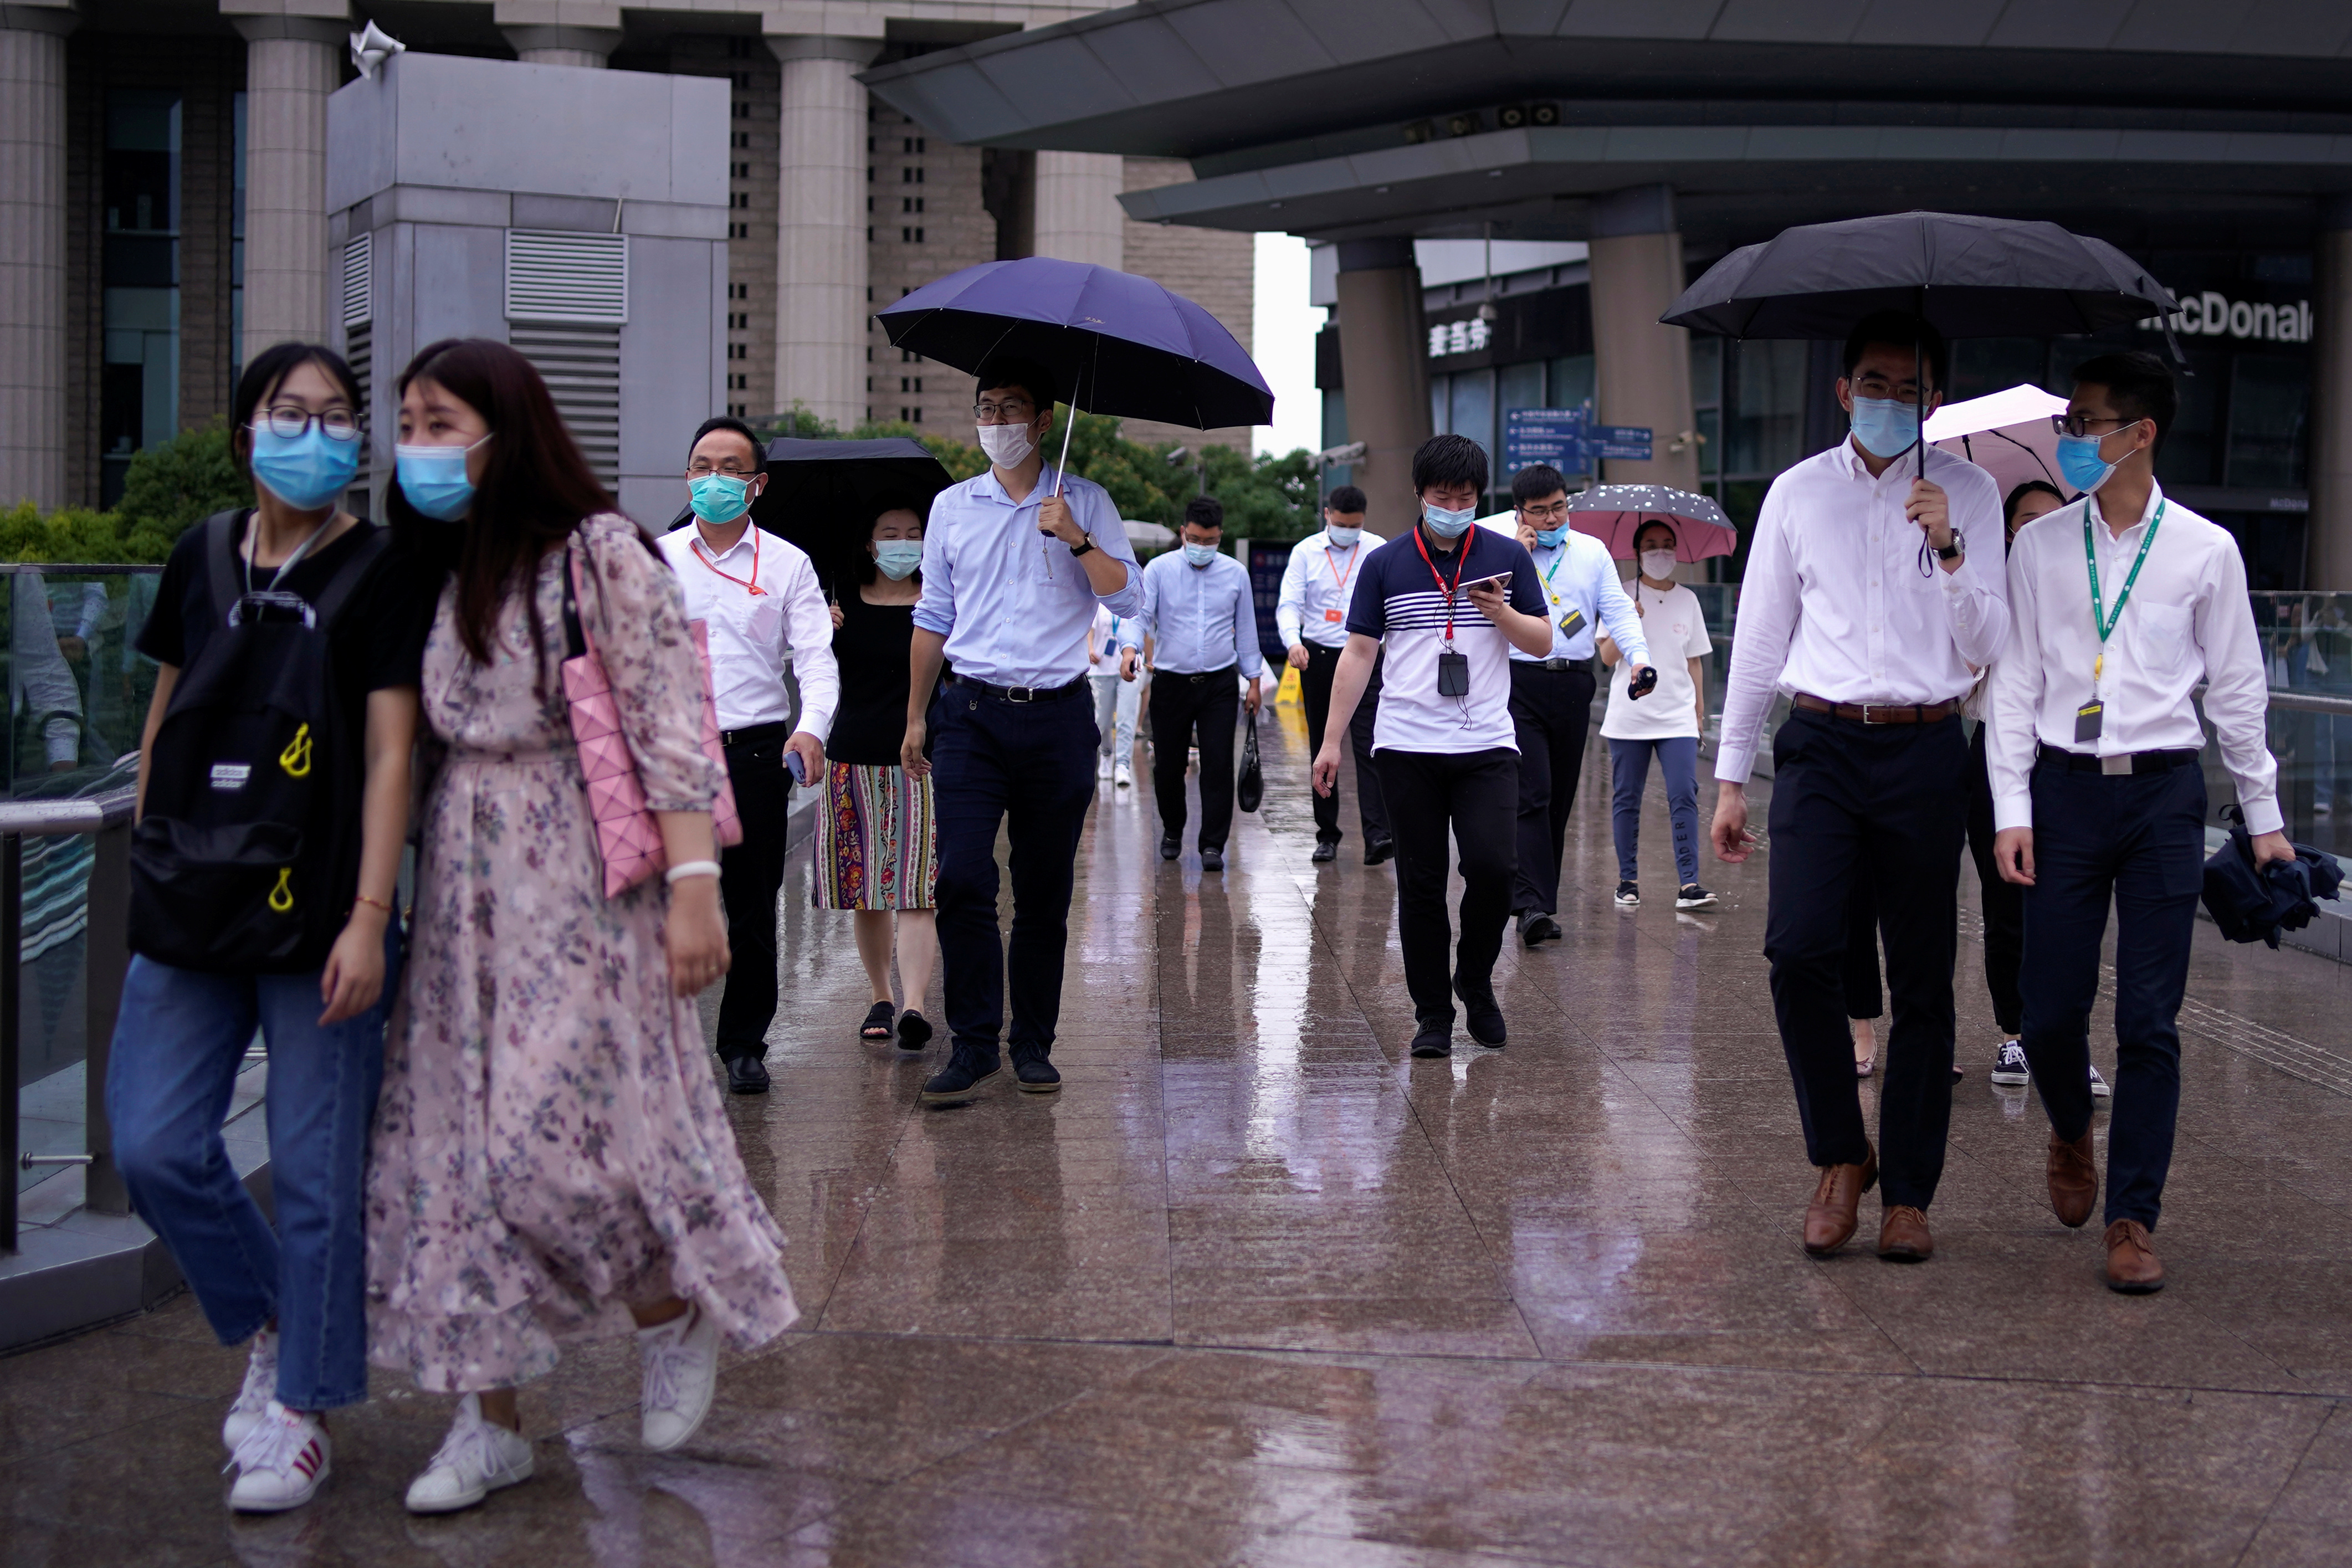 People wearing face masks are seen on a street in Shanghai, following the coronavirus disease (COVID-19) outbreak, China June 16, 2020. Photo: Reuters